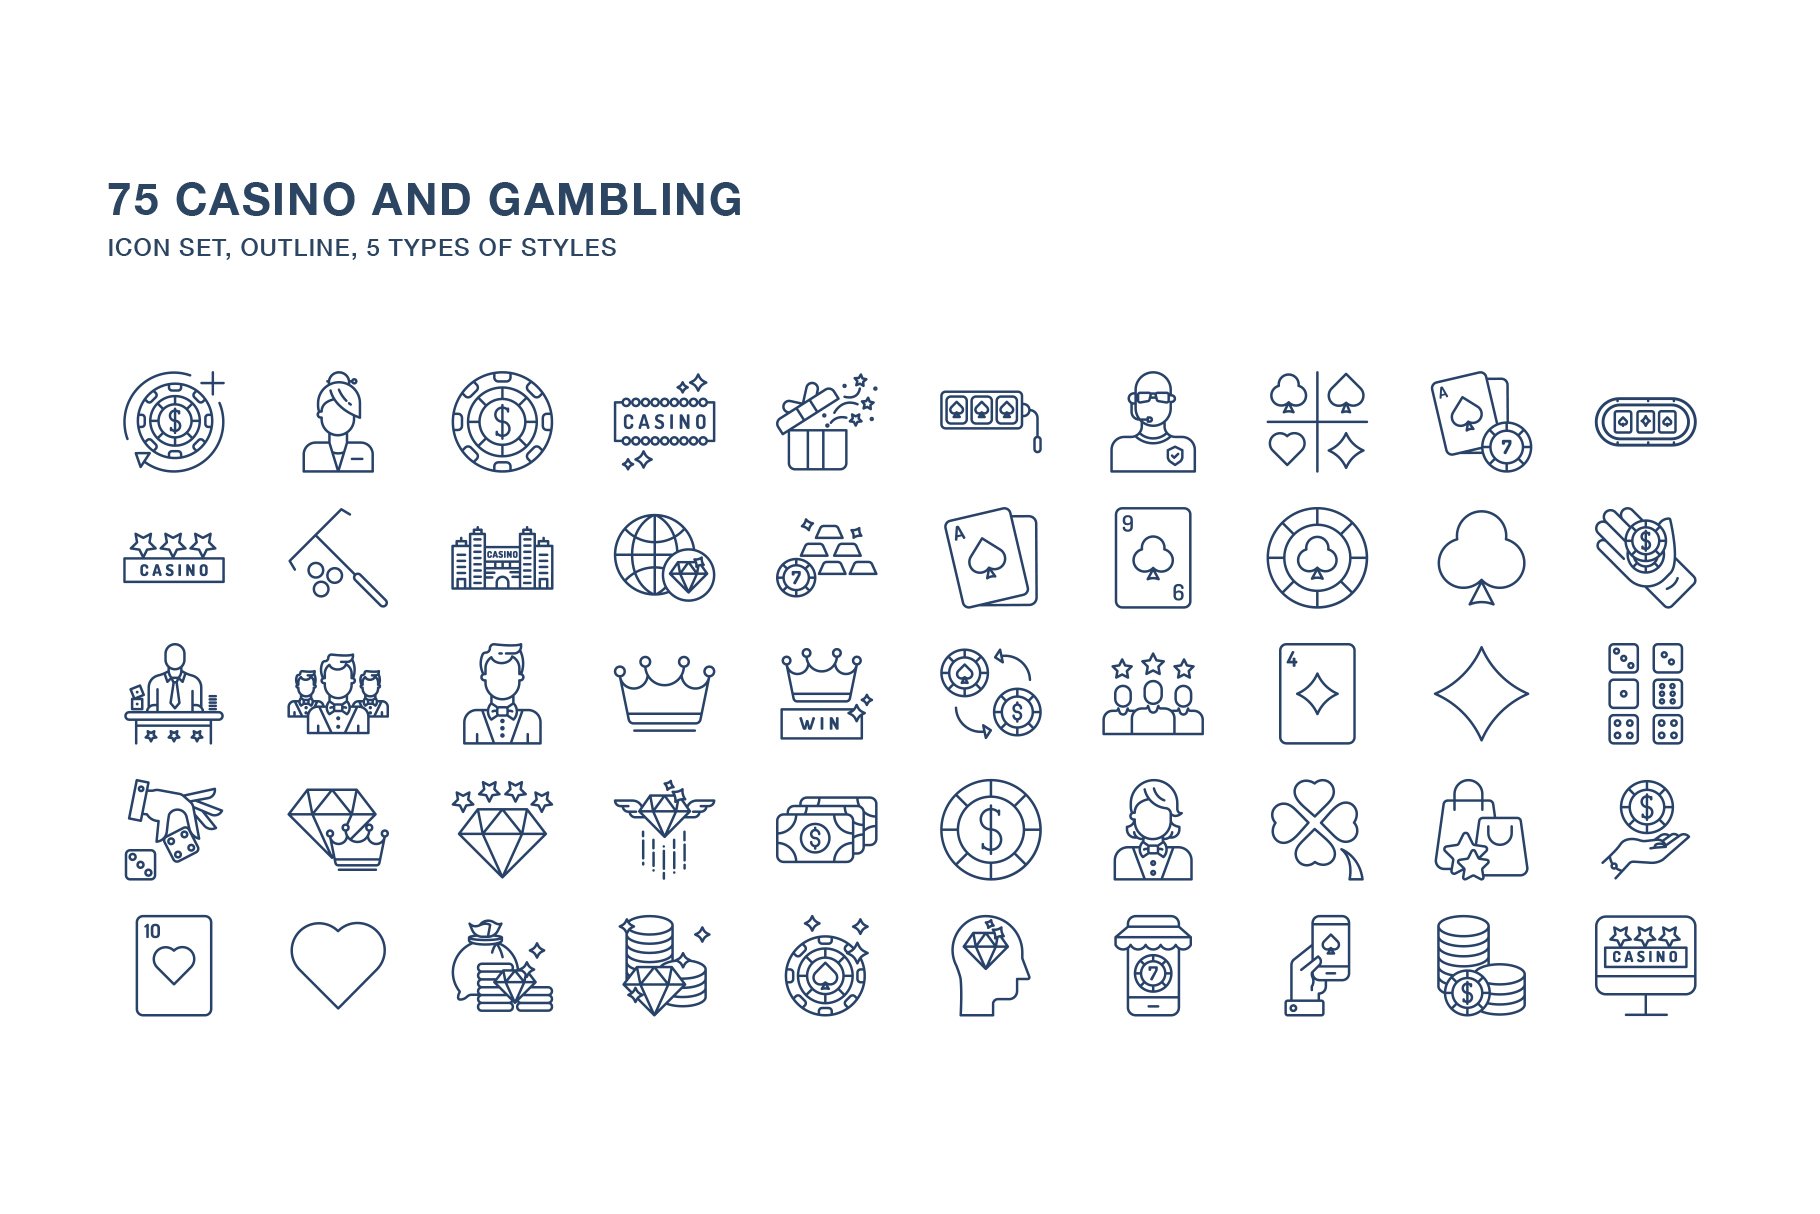 Casino and gambling icon set preview image.